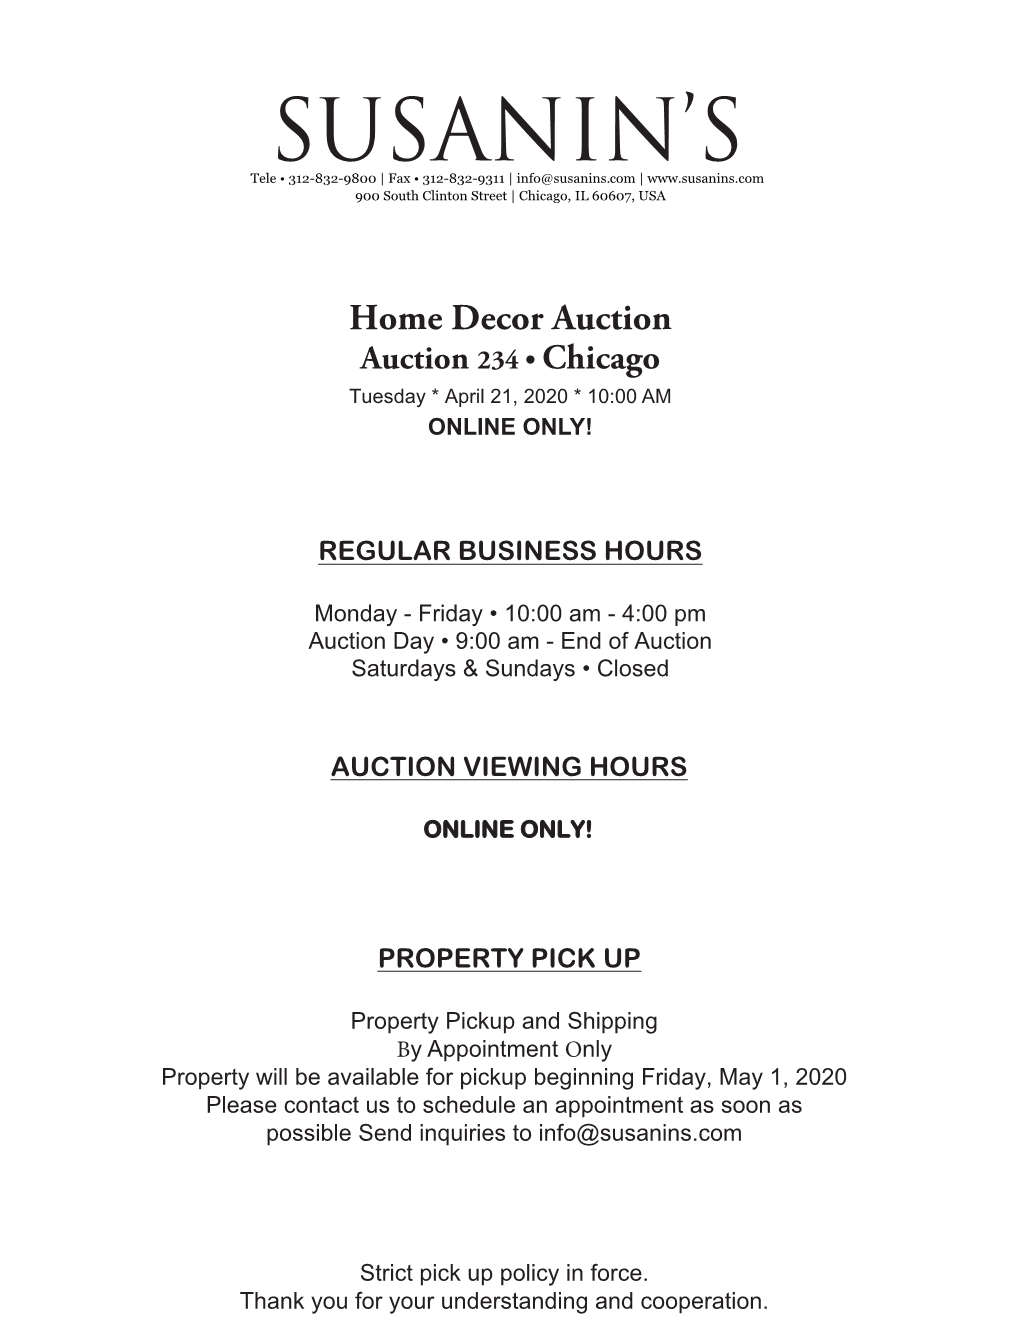 Home Decor Auction Auction 234 • Chicago Tuesday * April 21, 2020 * 10:00 AM ONLINE ONLY!